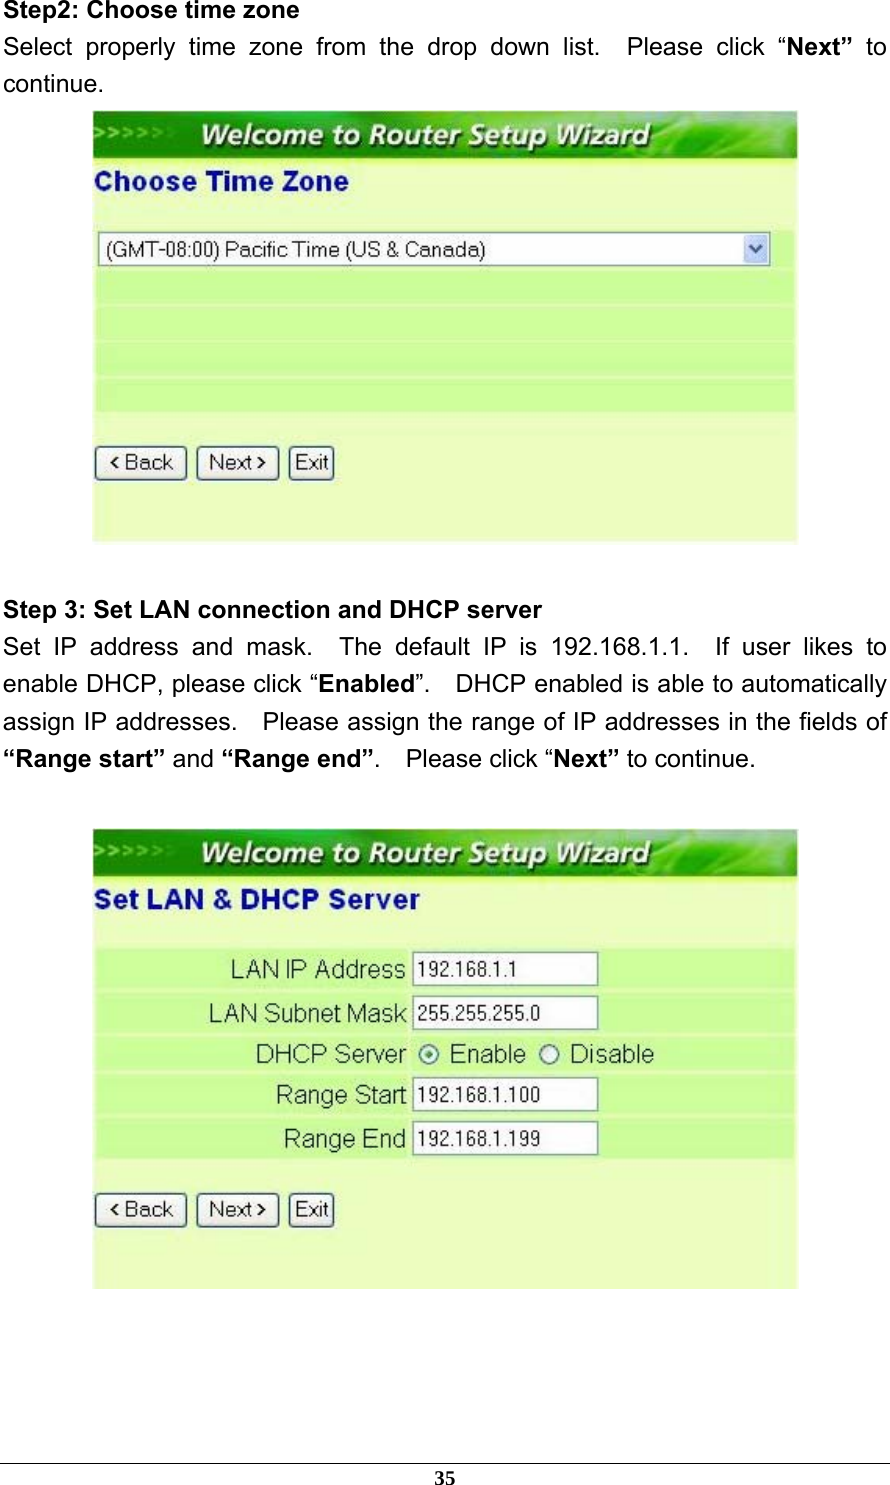 Step2: Choose time zone Select properly time zone from the drop down list.  Please click “Next”  to continue.   Step 3: Set LAN connection and DHCP server Set IP address and mask.  The default IP is 192.168.1.1.  If user likes to enable DHCP, please click “Enabled”.    DHCP enabled is able to automatically assign IP addresses.    Please assign the range of IP addresses in the fields of “Range start” and “Range end”.  Please click “Next” to continue.    35 